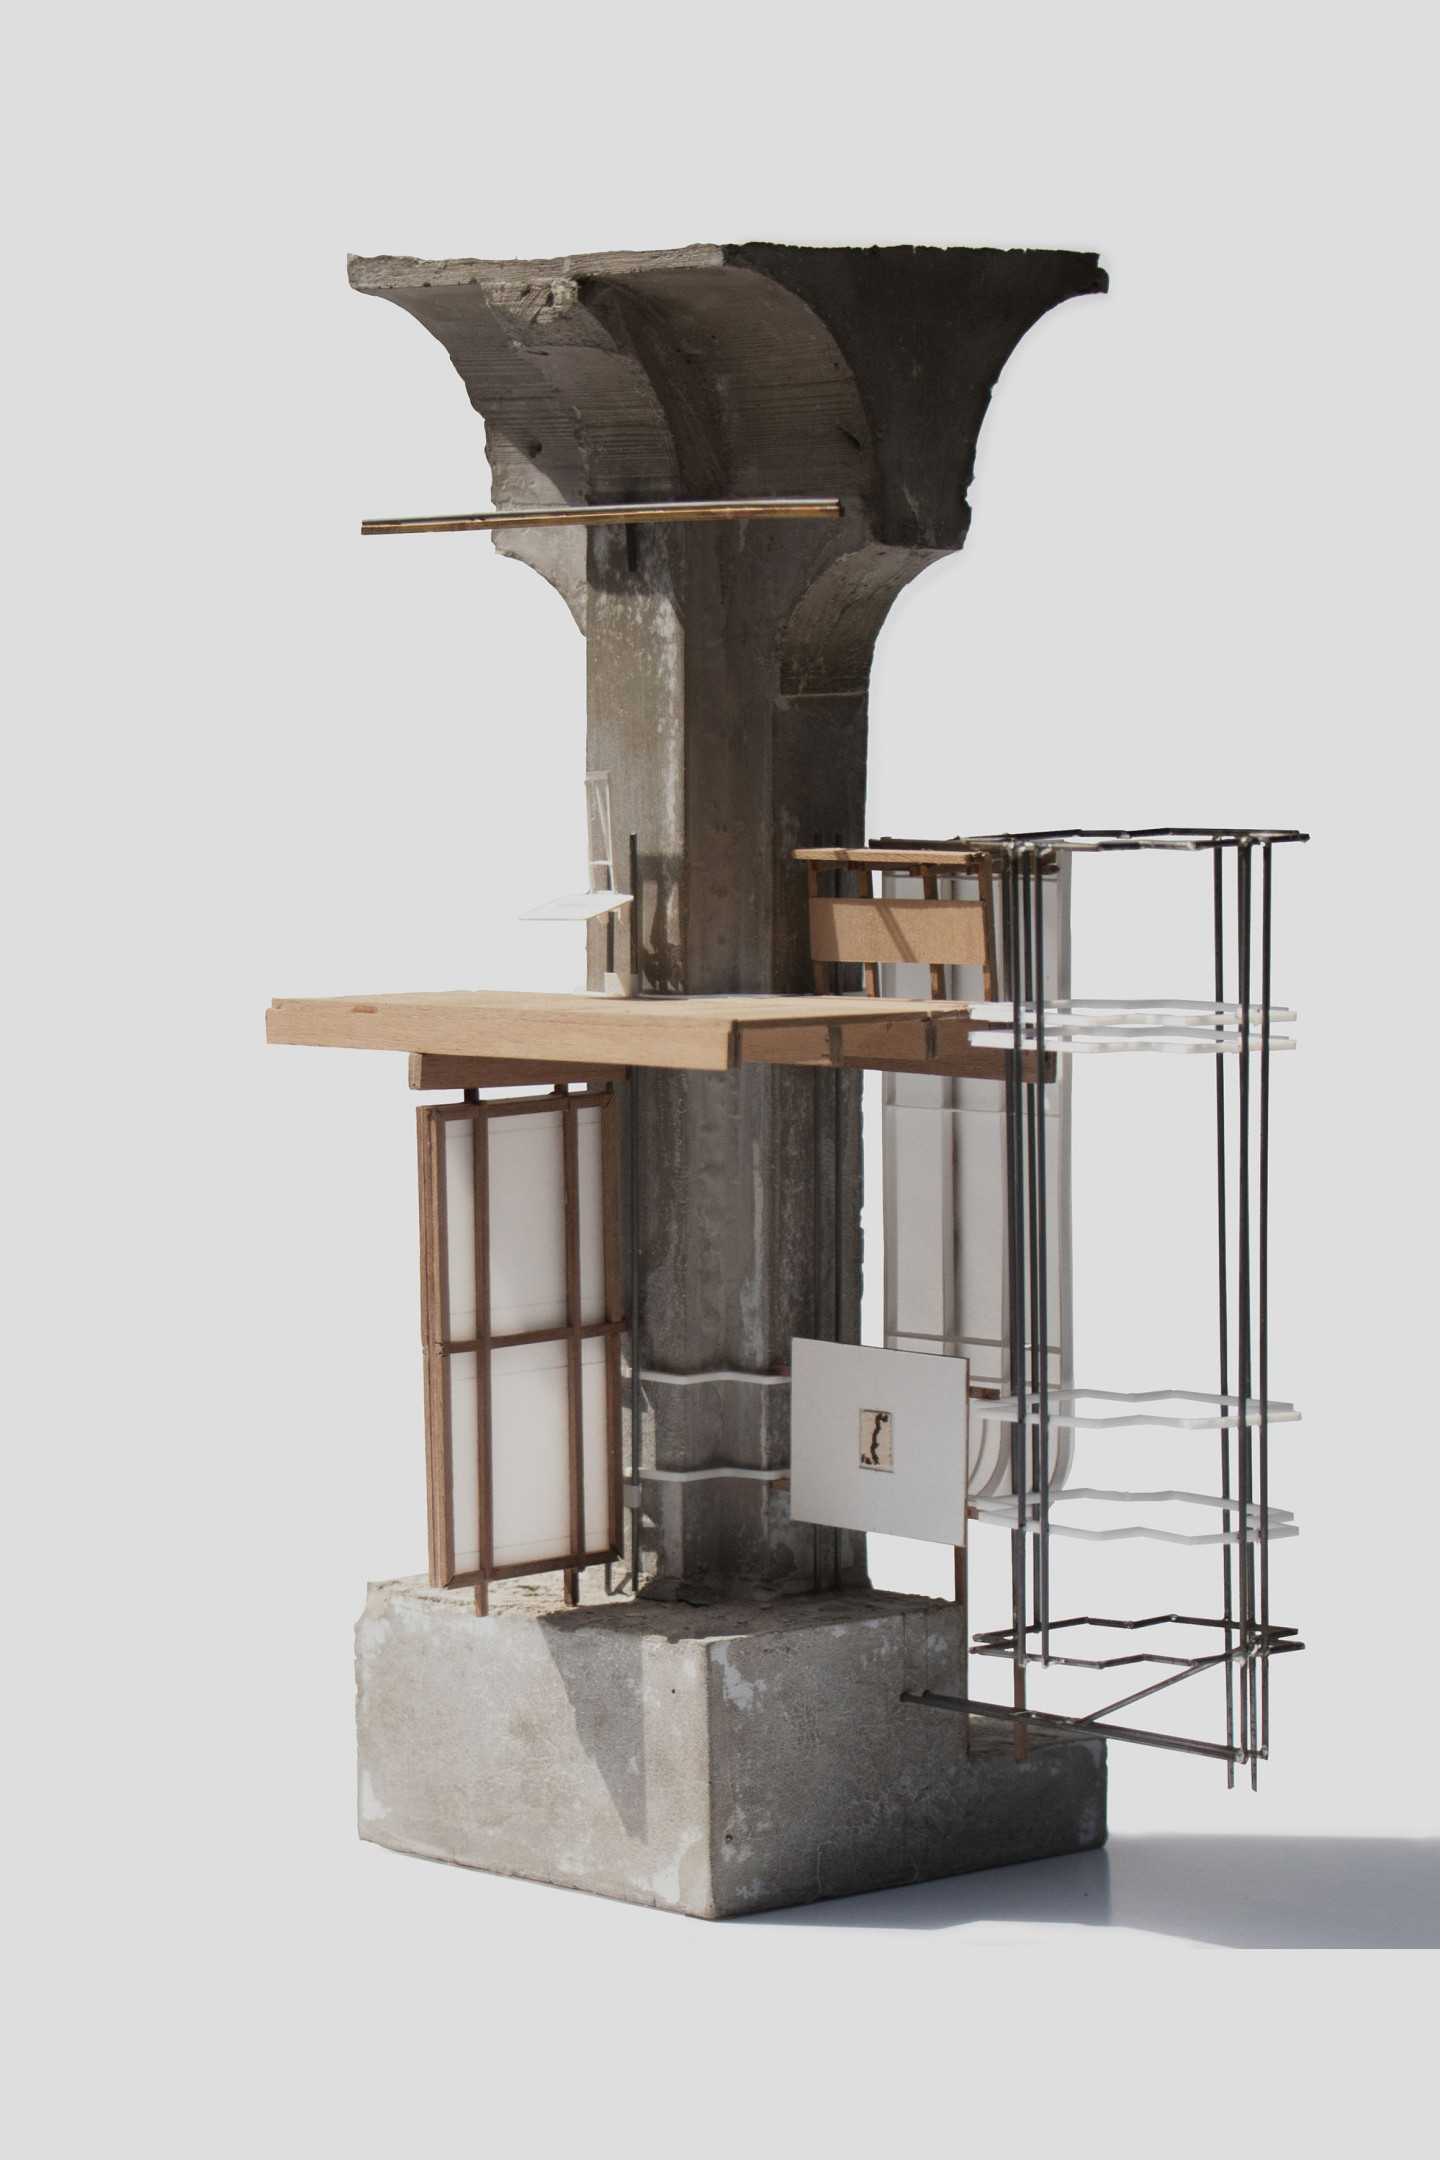 Kai McLaughlin's model of the reuse of an ancient Roman cistern at Piscina Mirabilis. Made of cast of a mixture of cement, sand, plaster, polymer and pigment, paper, metal.